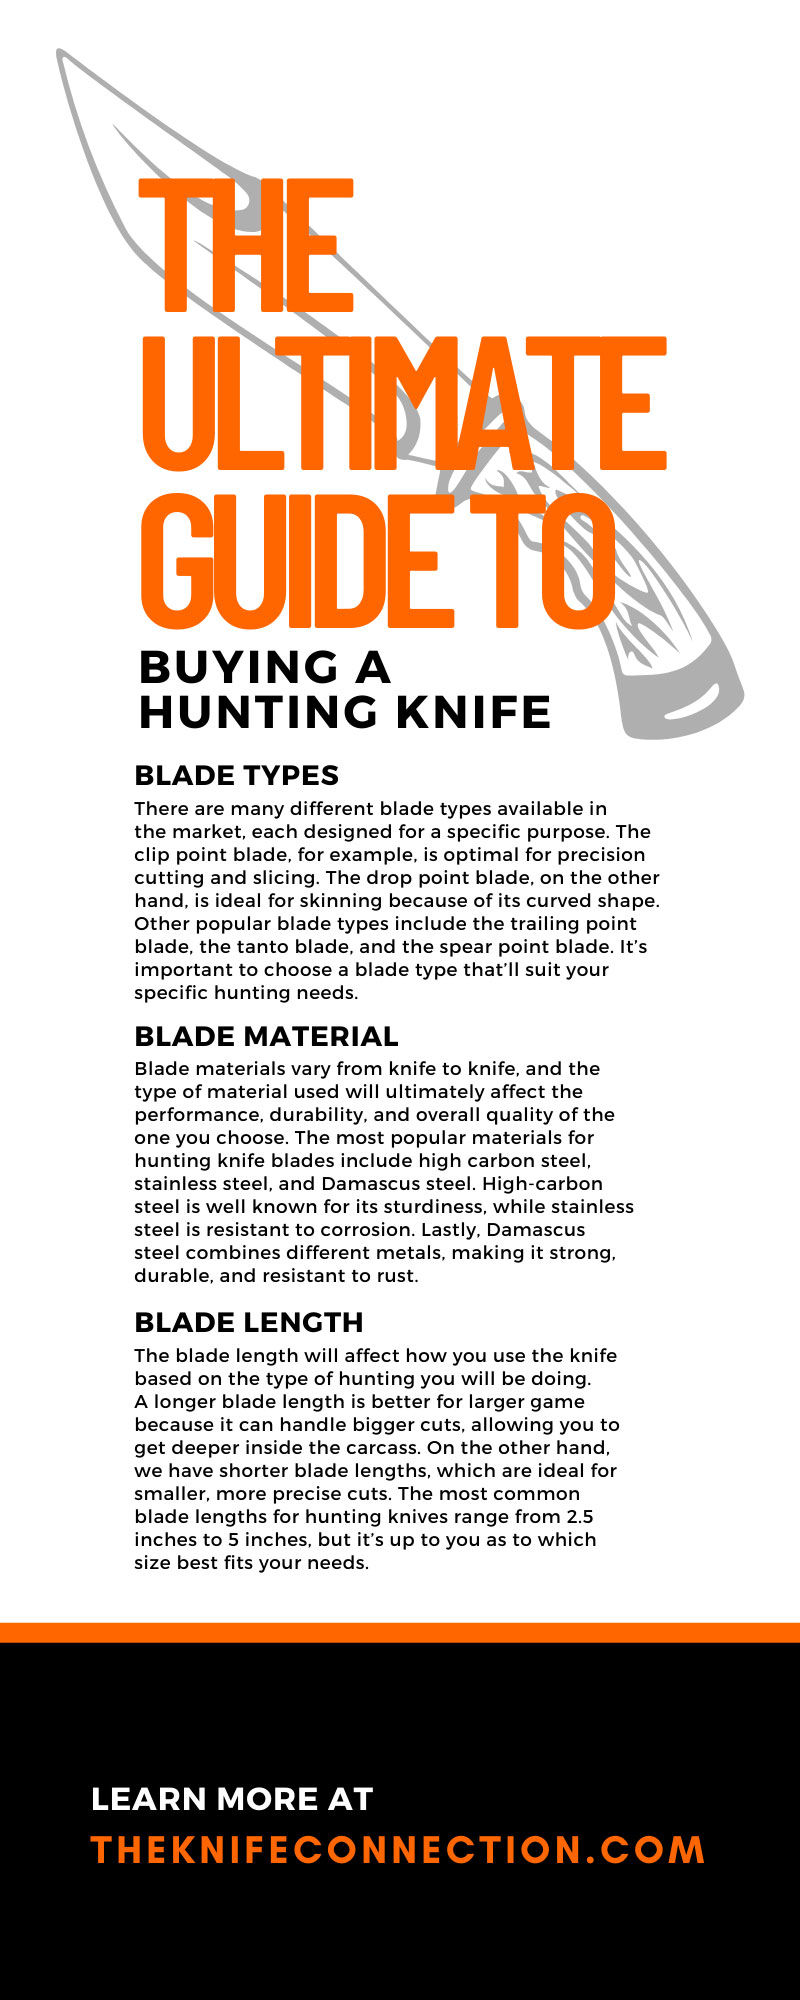 The Ultimate Guide to Buying a Hunting Knife